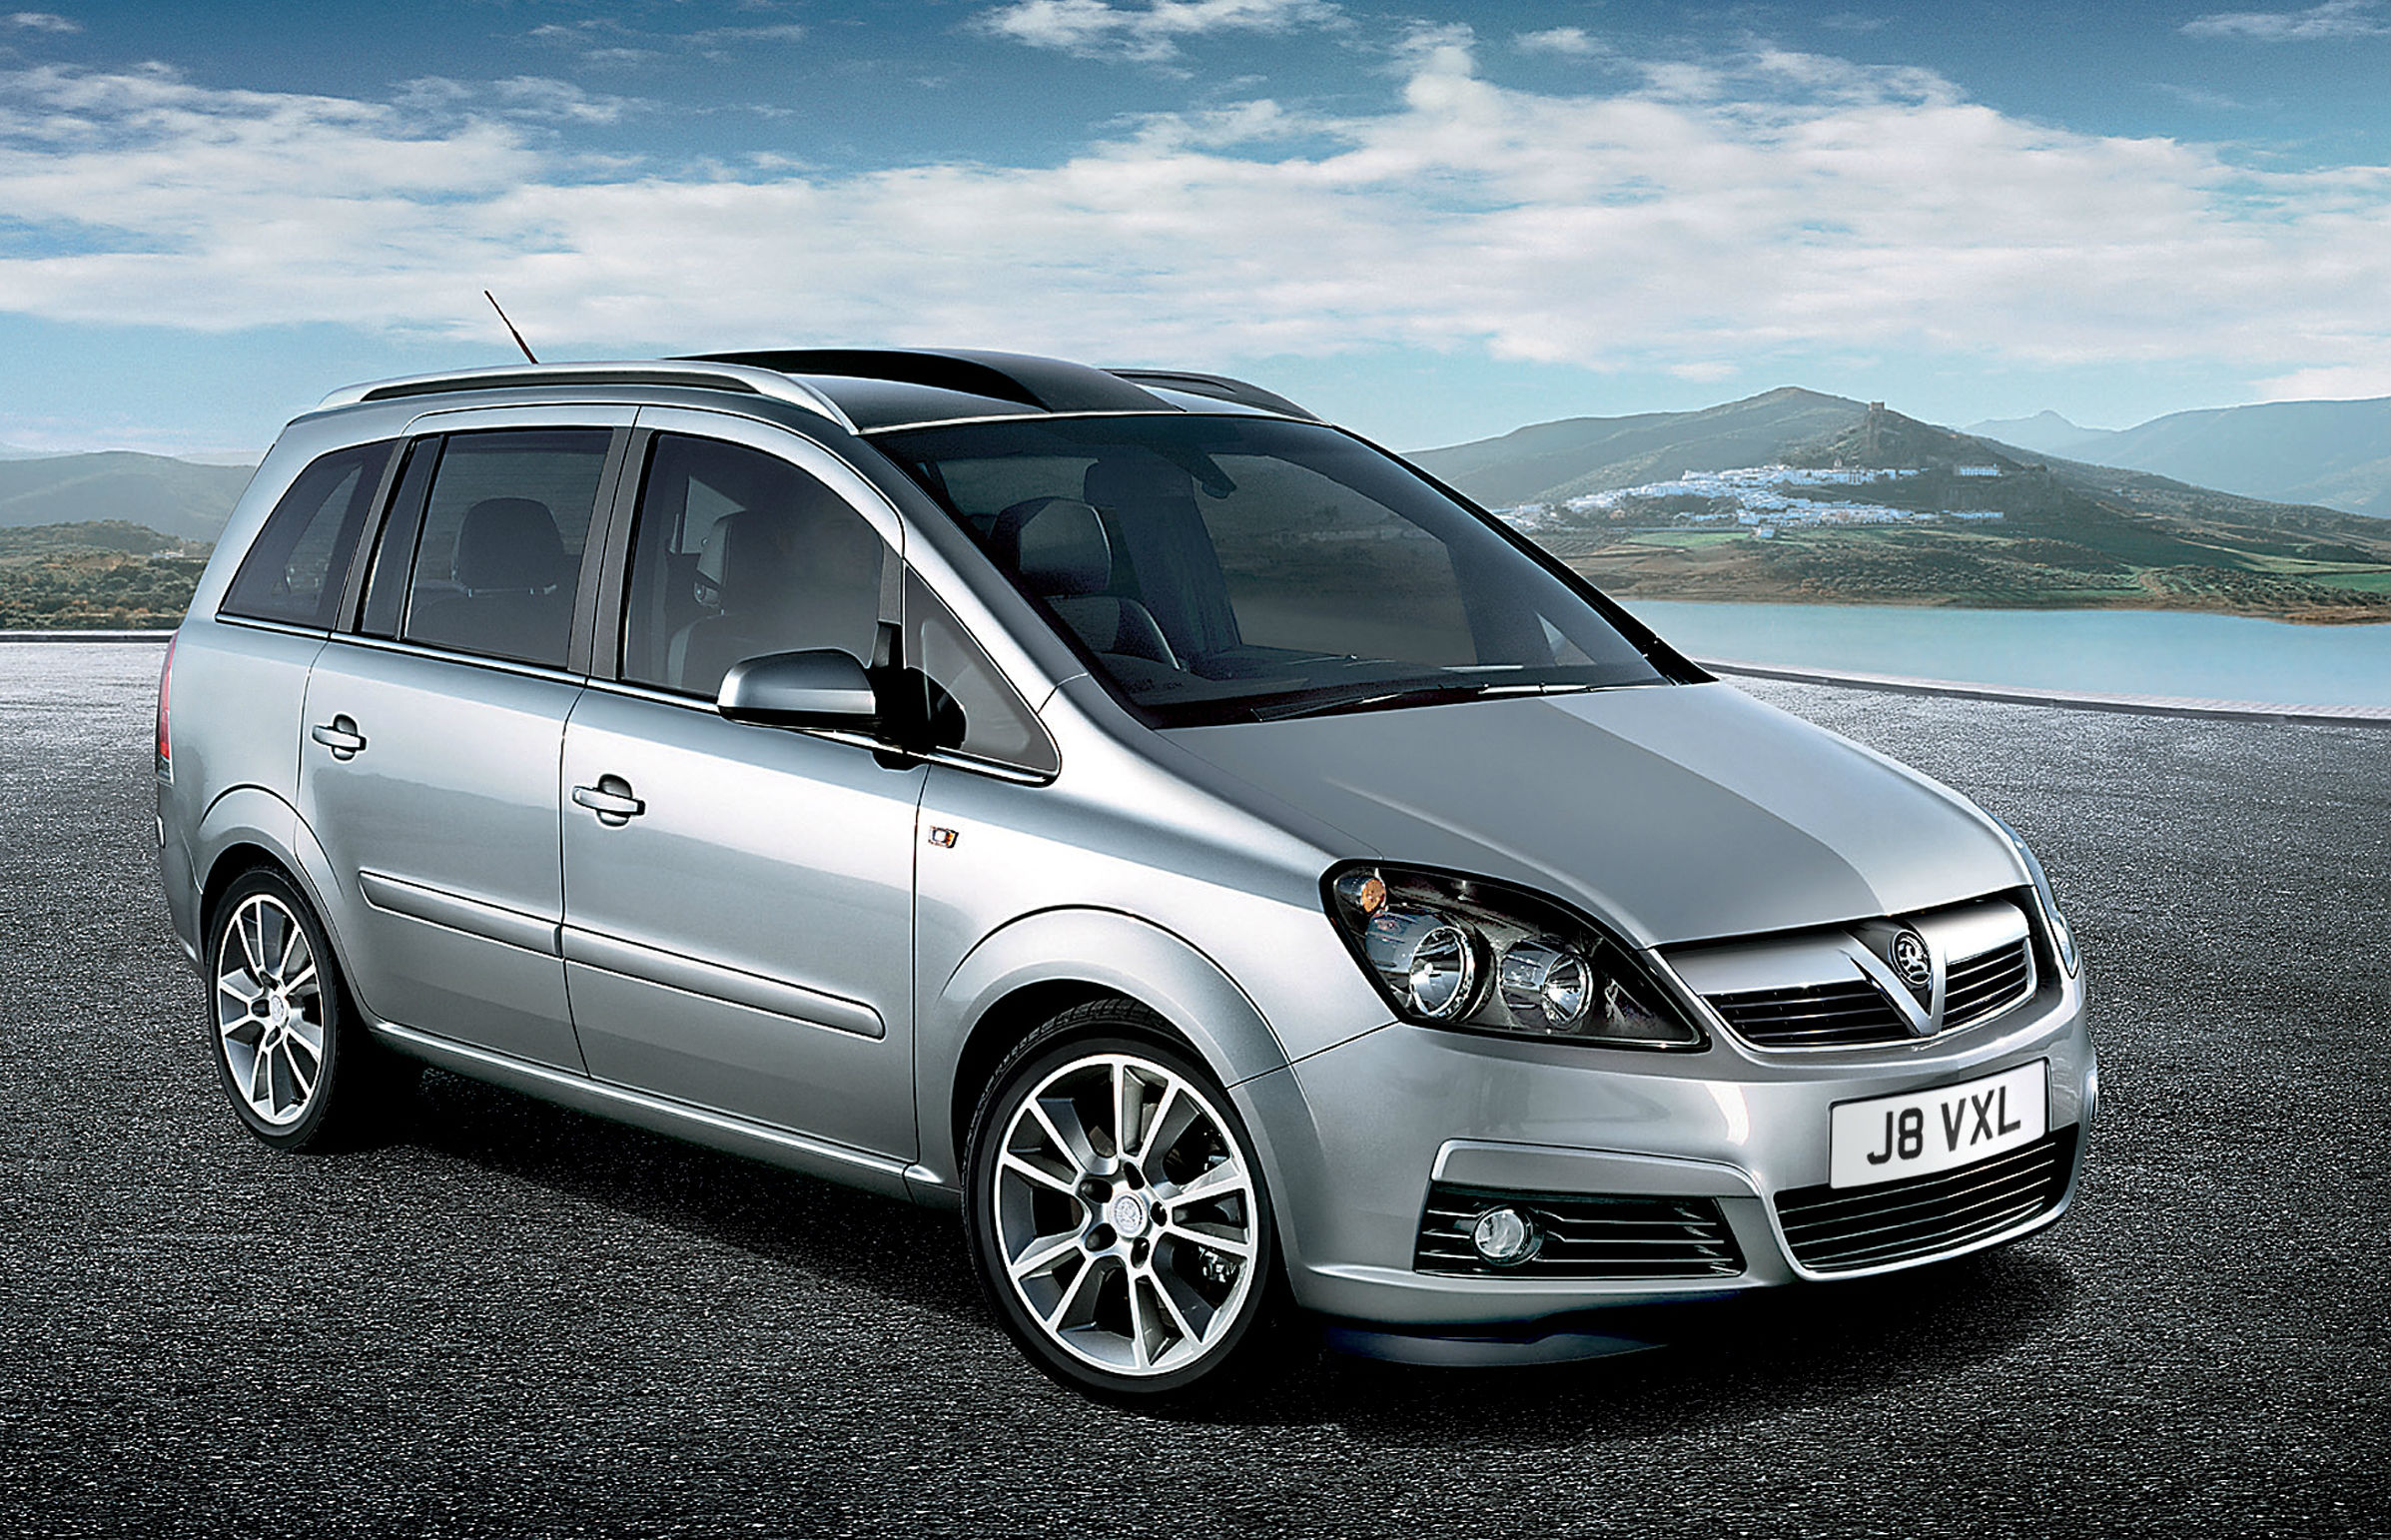 Vauxhall is offering a free safety inspection to owners of the Zafira B (above) built between 2005 and 2012